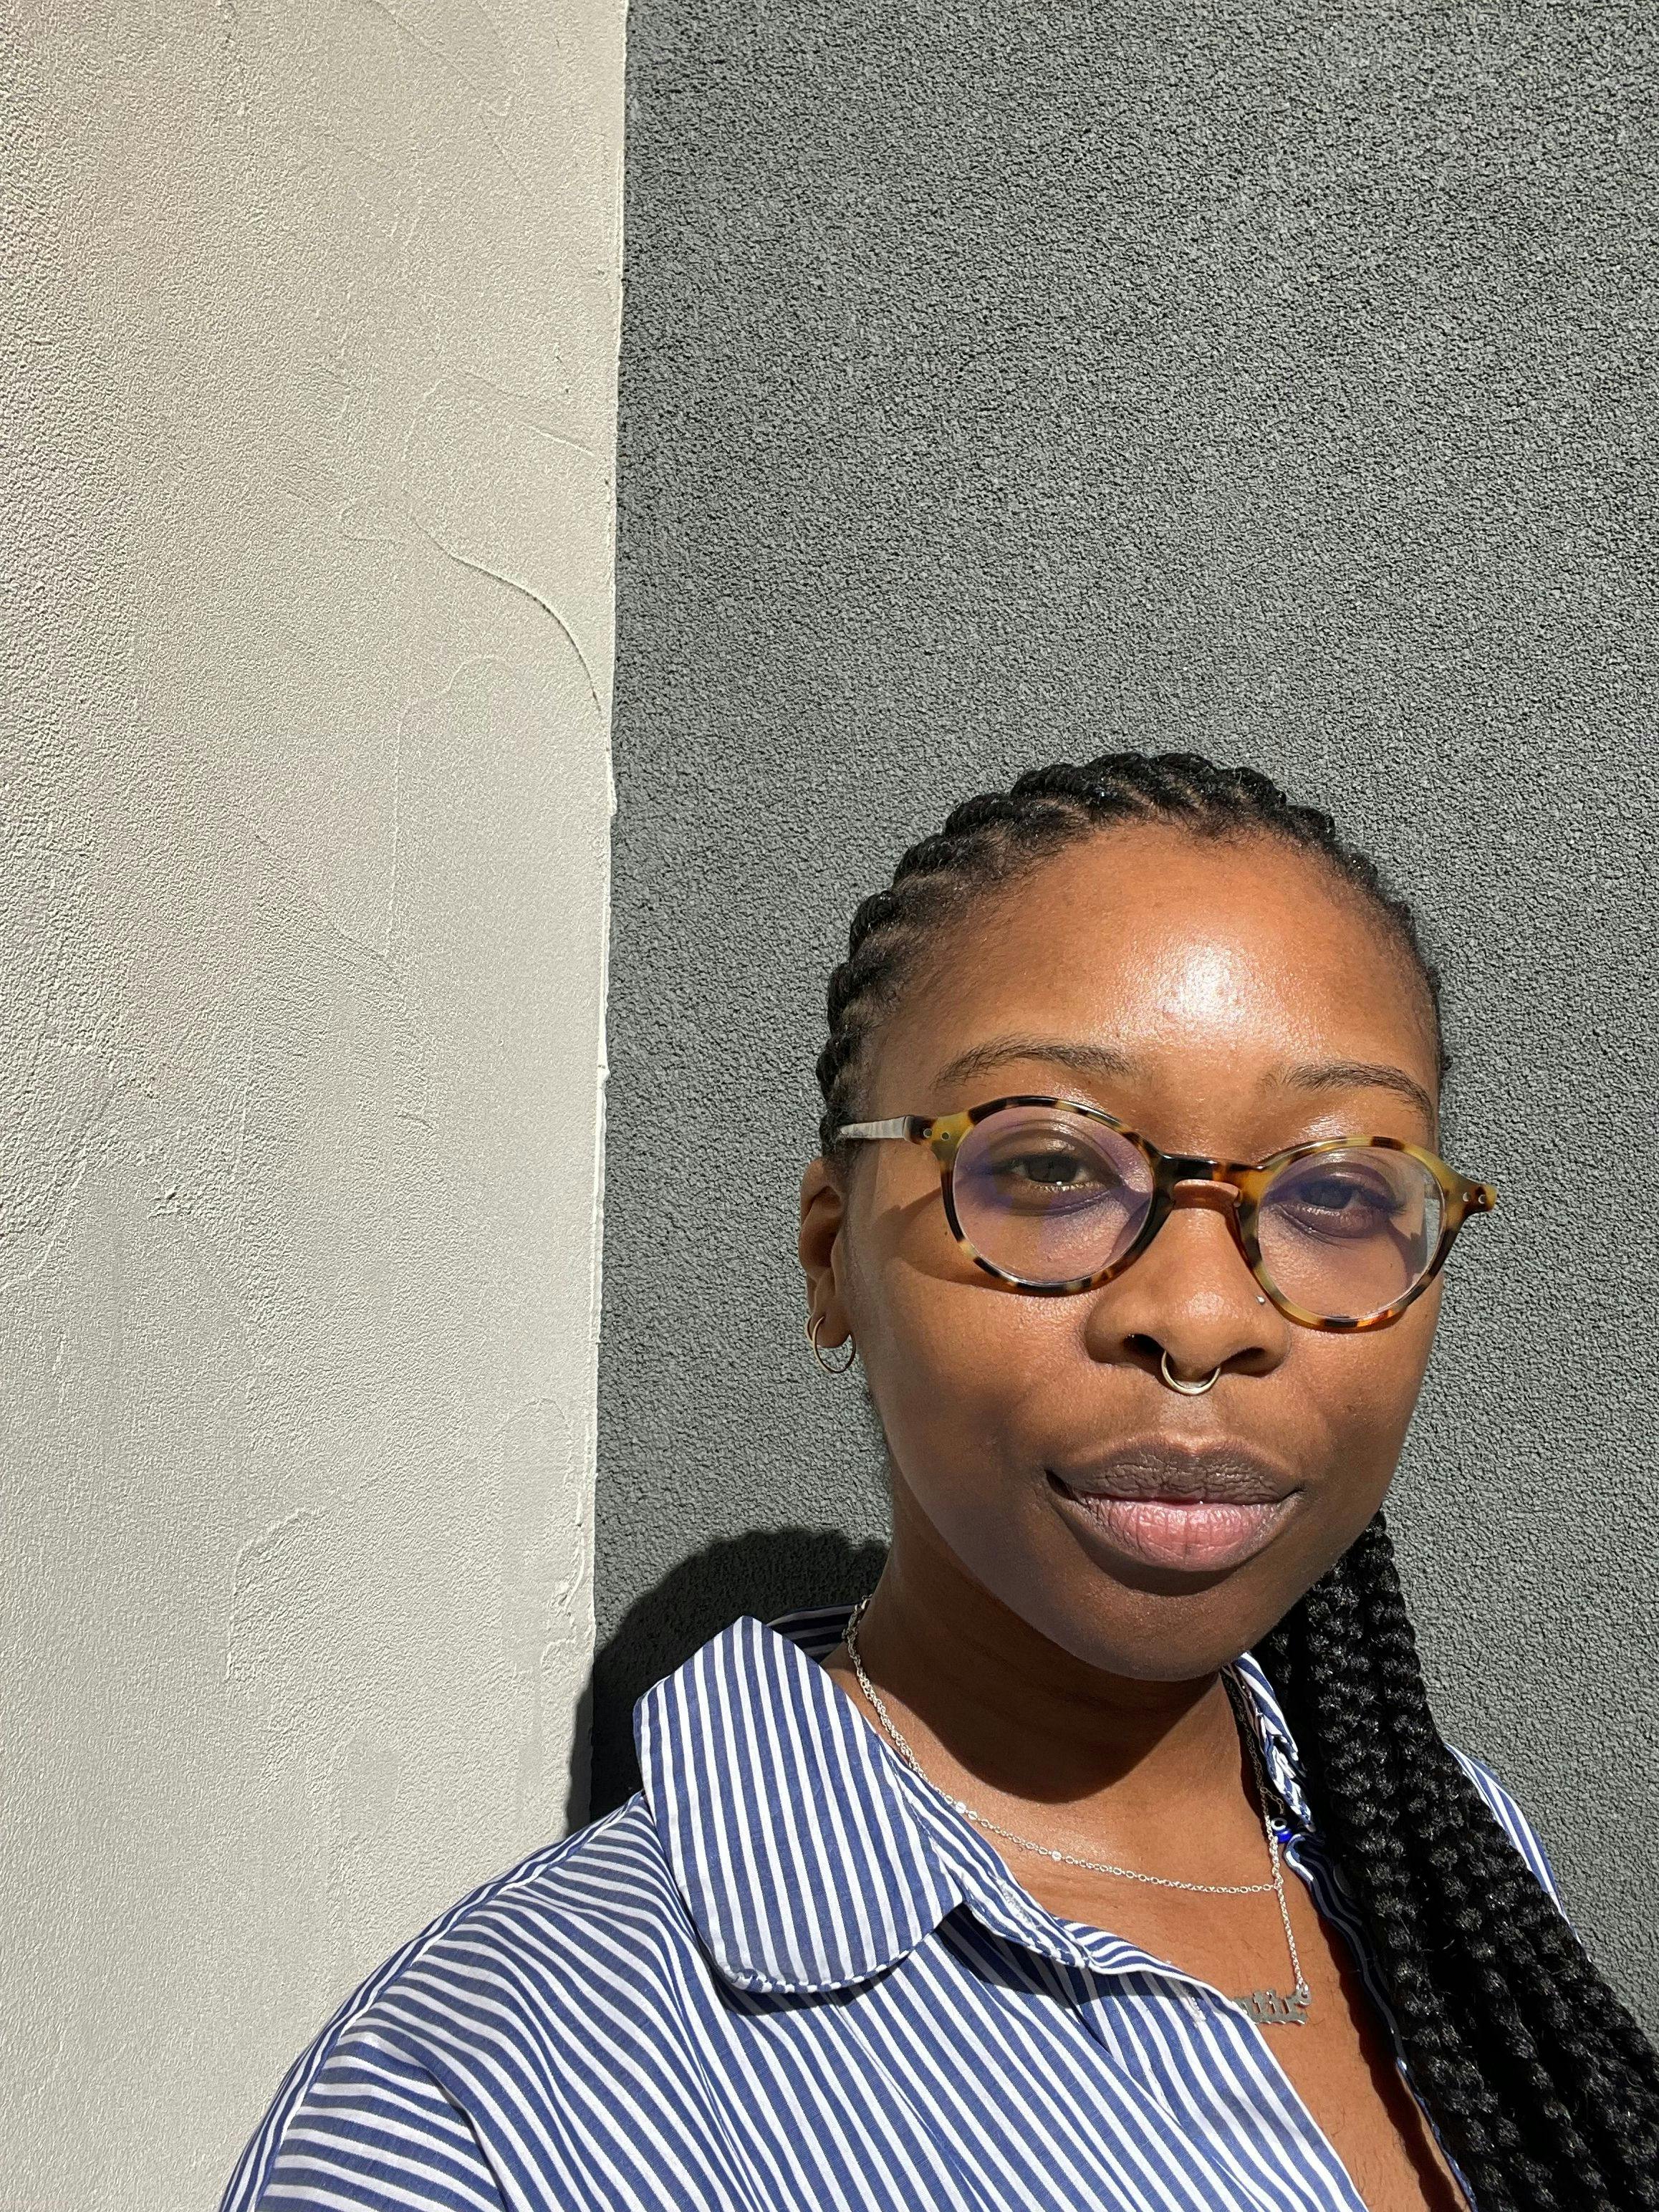 A black woman with tortoiseshell glasses, a septum piercing, and her hair in braids stands against a plaster wall under bright daylight and smiles softly to the camera.